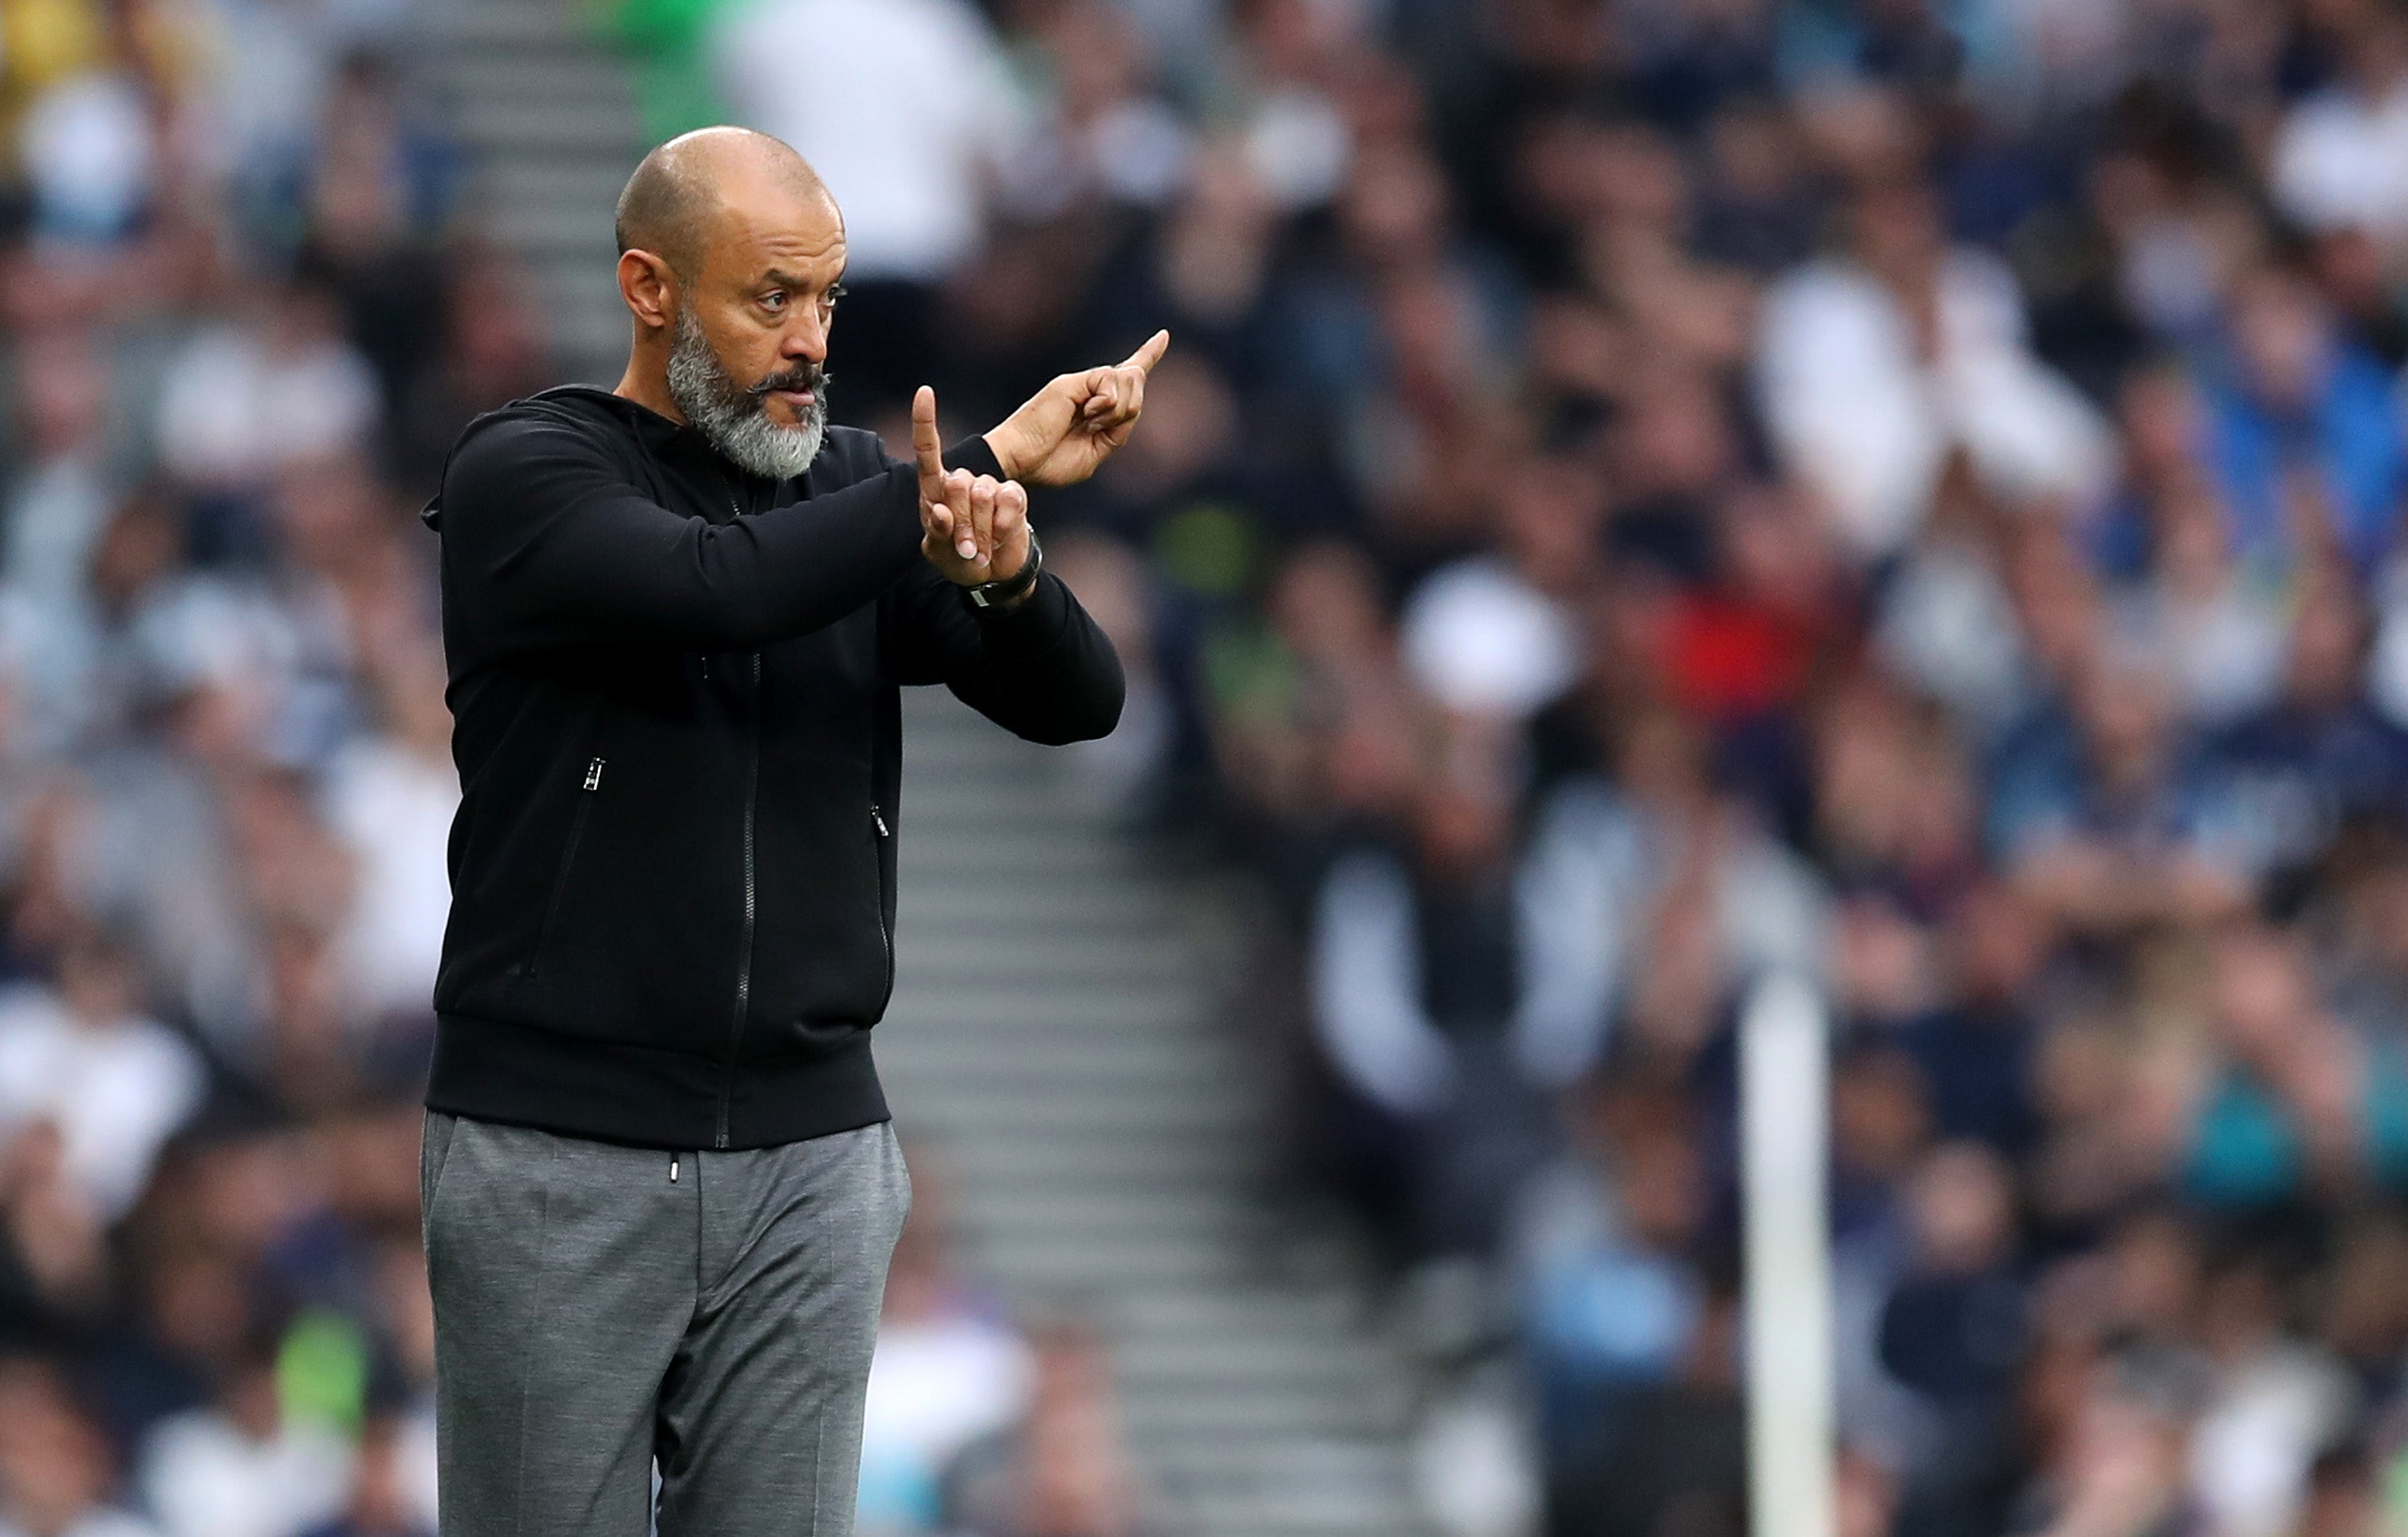 Spurs manager Nuno Espirito Santo faces a second return to Wolves on Wednesday